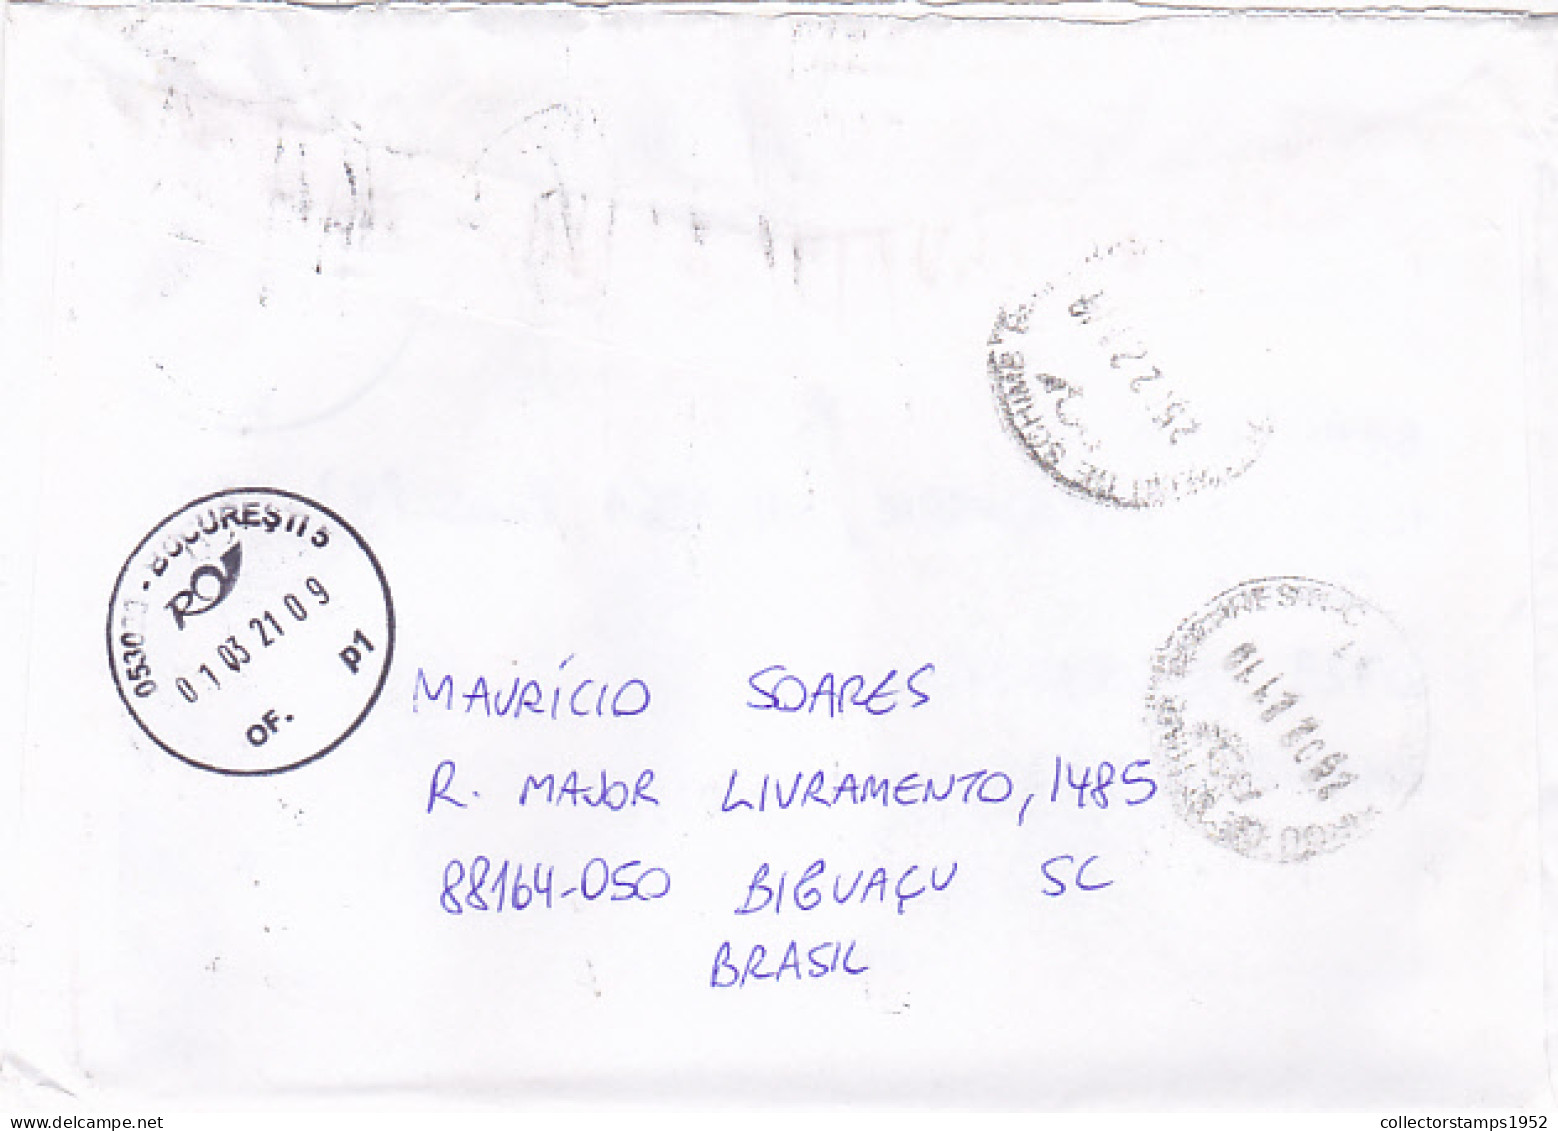 CRAFTS, TRUMPET, MARKETING, FINE STAMPS ON REGISTERED COVER, 2021, BRAZIL - Covers & Documents